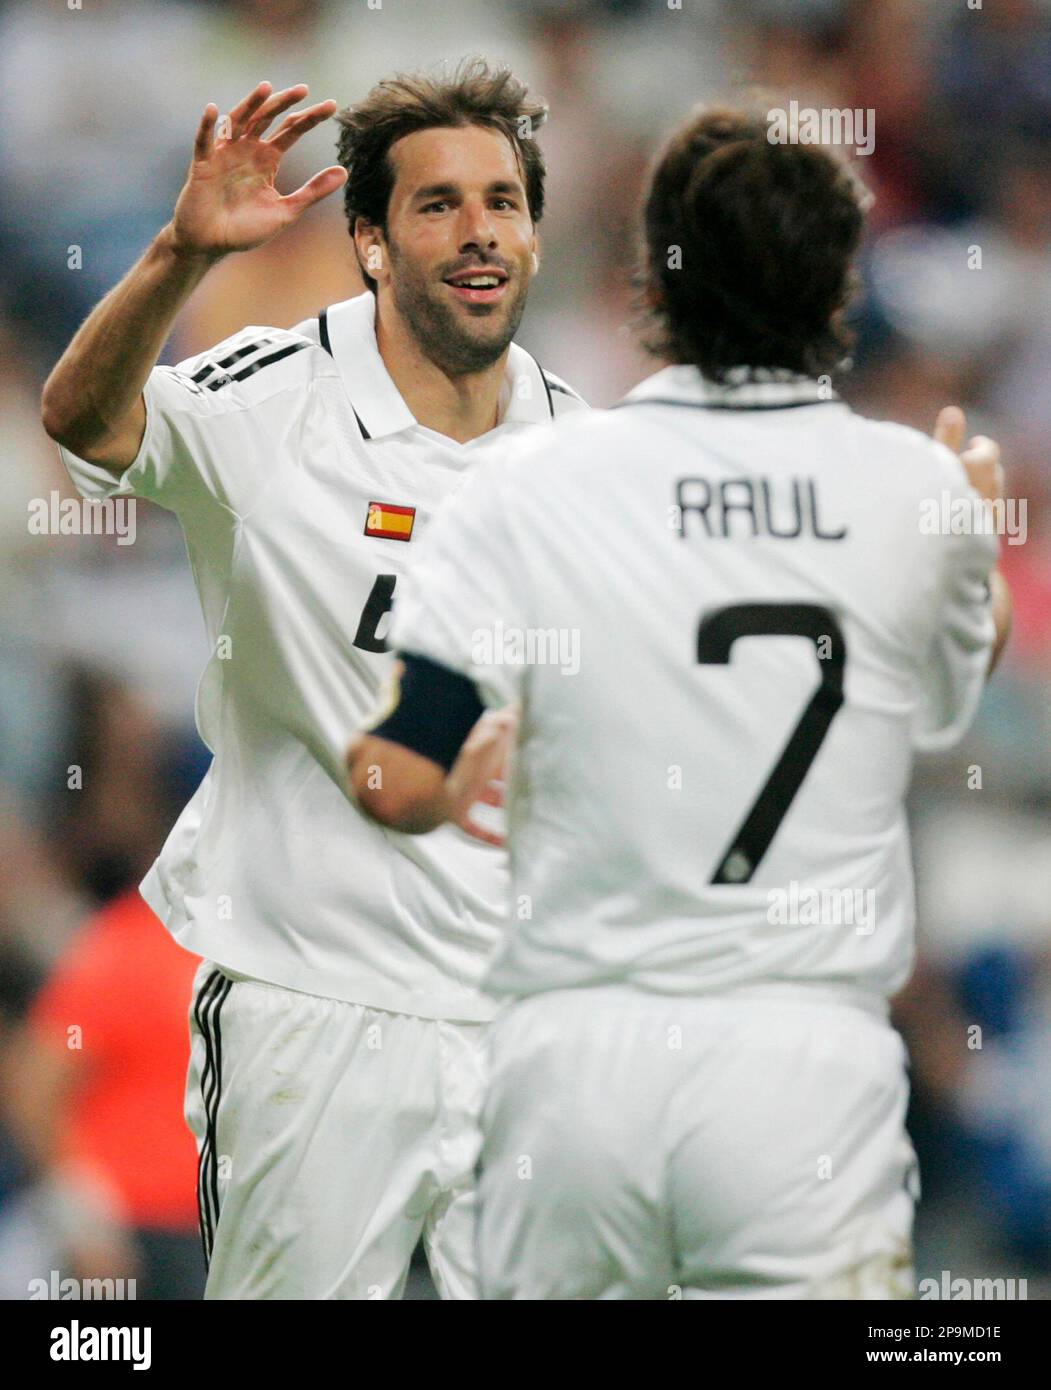 Real Madrid's Ruud Van Nistelrooy of Netherlands, left, reacts with fellow  team member Raul Gonzalez, after scoring a goal during their Champions  League Group H soccer match against Bate at the Santiago